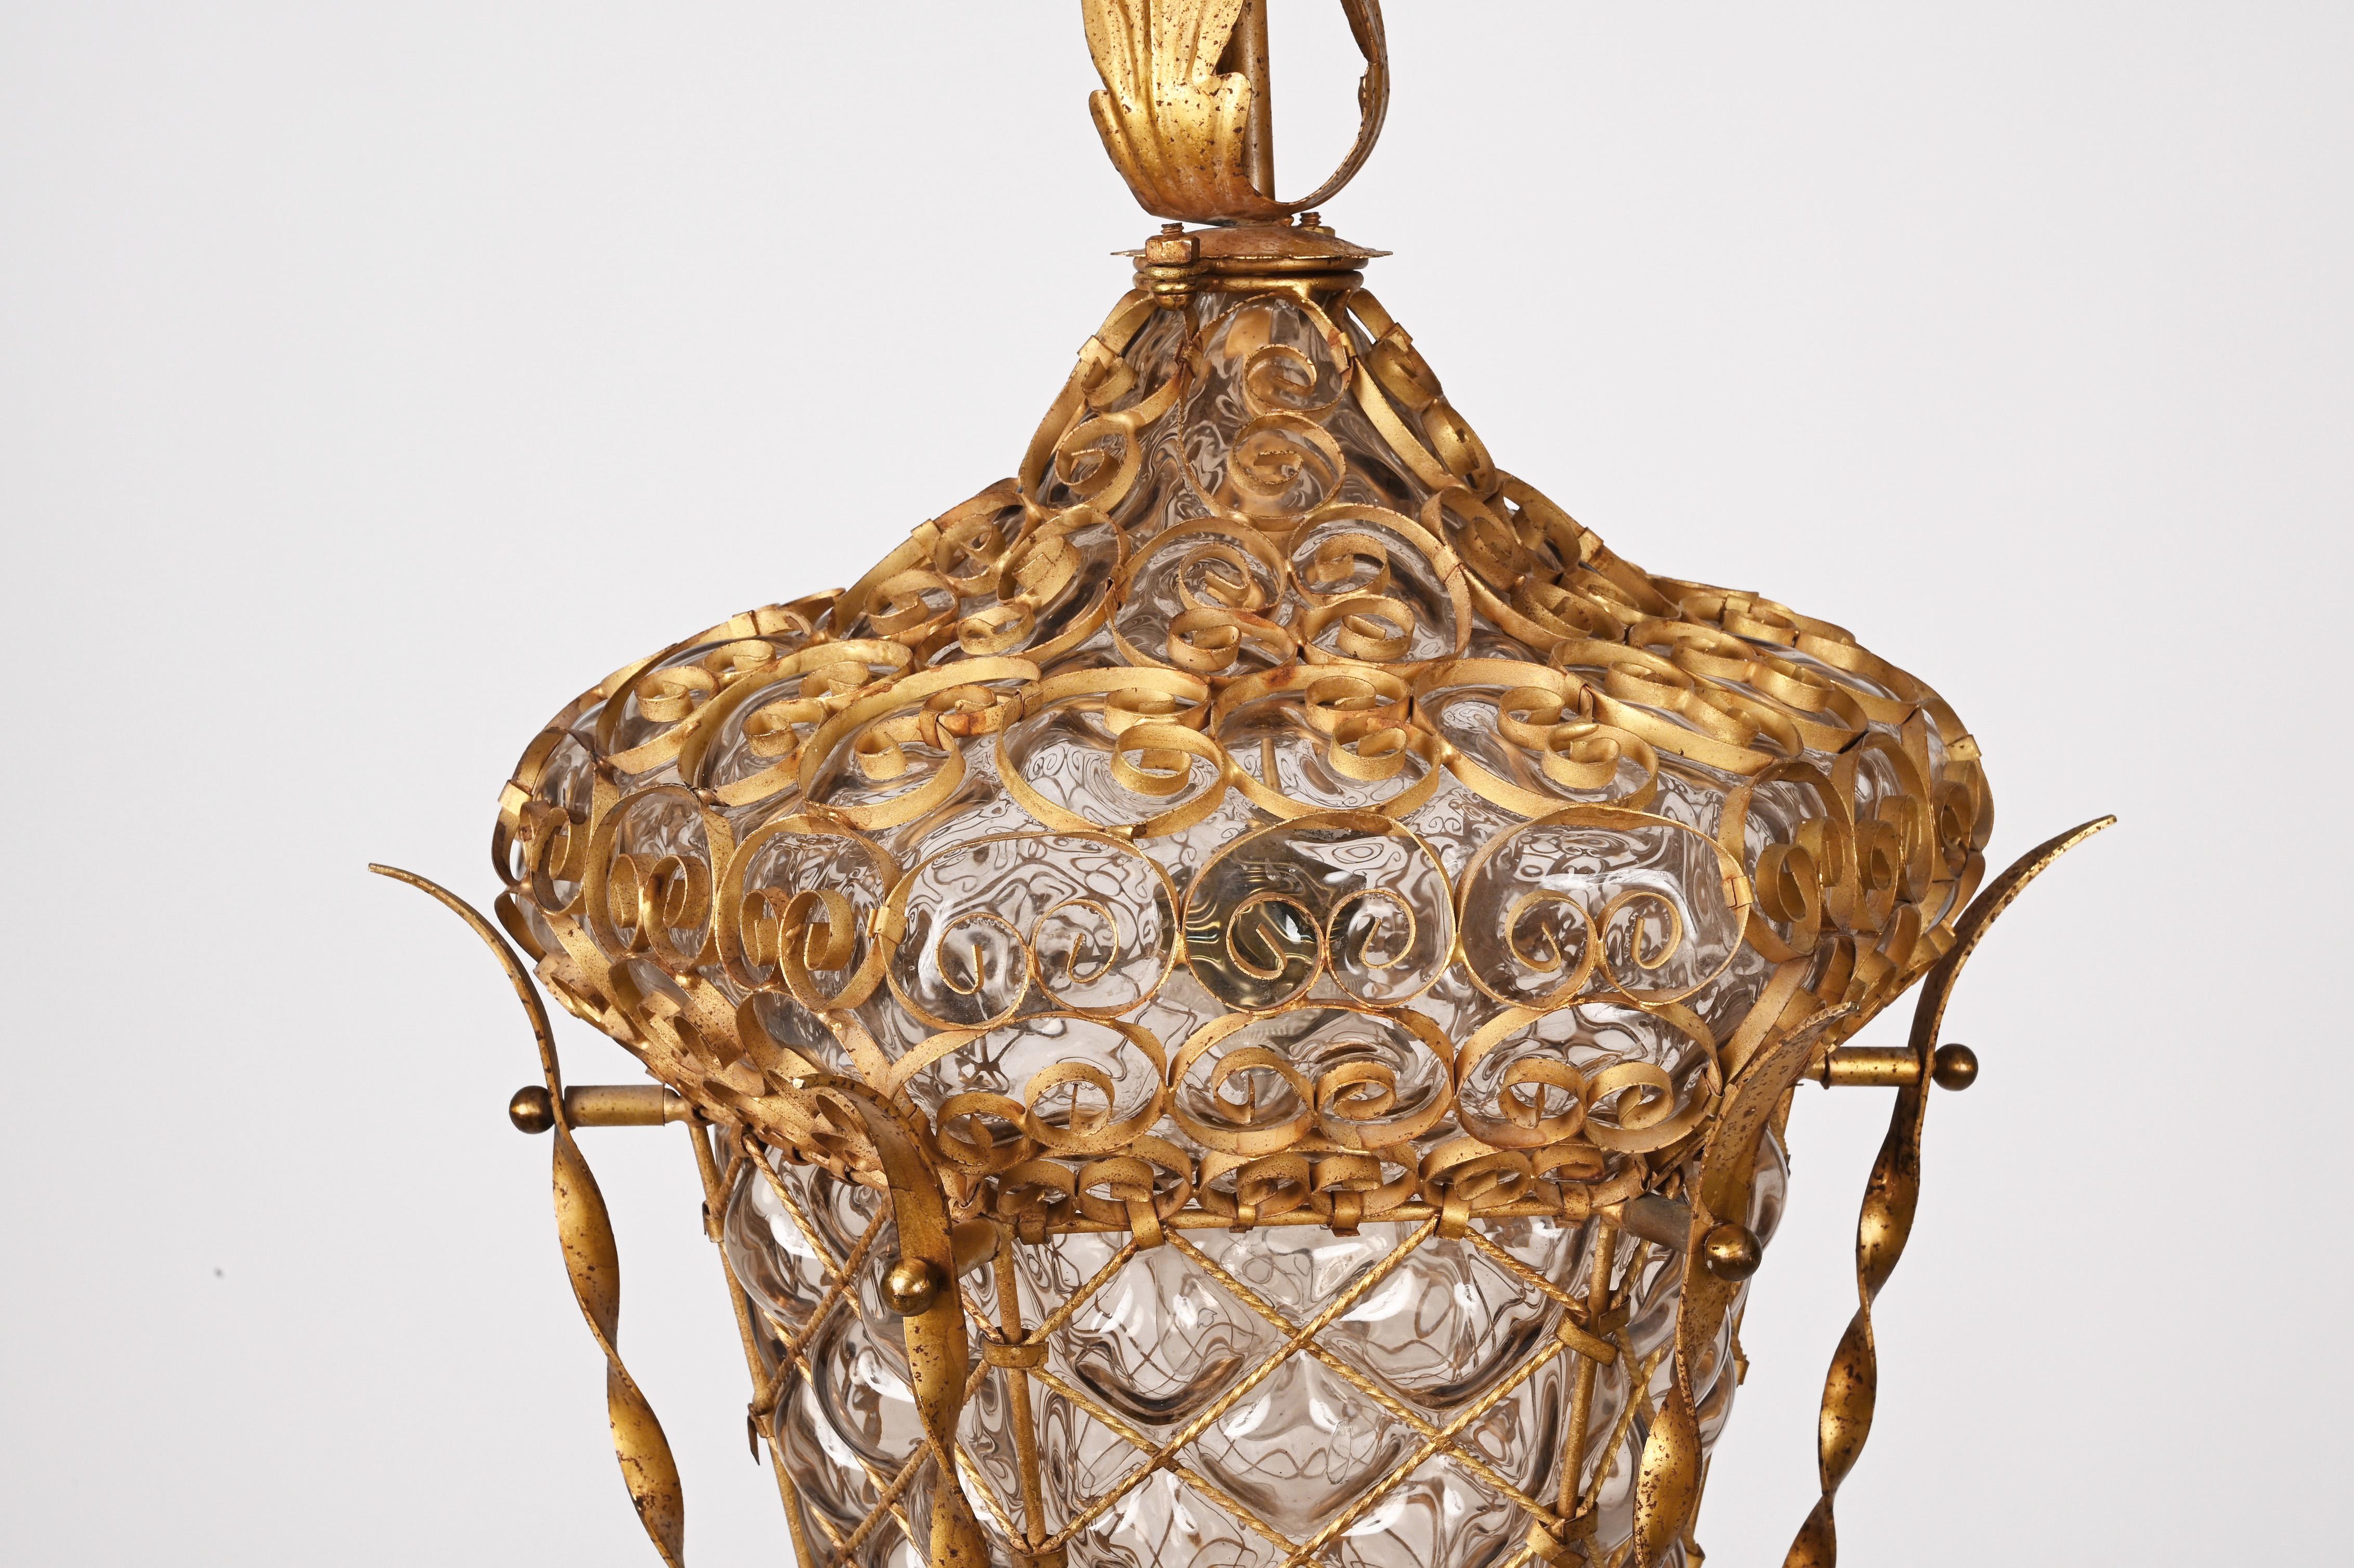 Midcentury Venetian Mouth Blown Glass in Gold Painted Metal Frame Lantern, 1940s For Sale 2